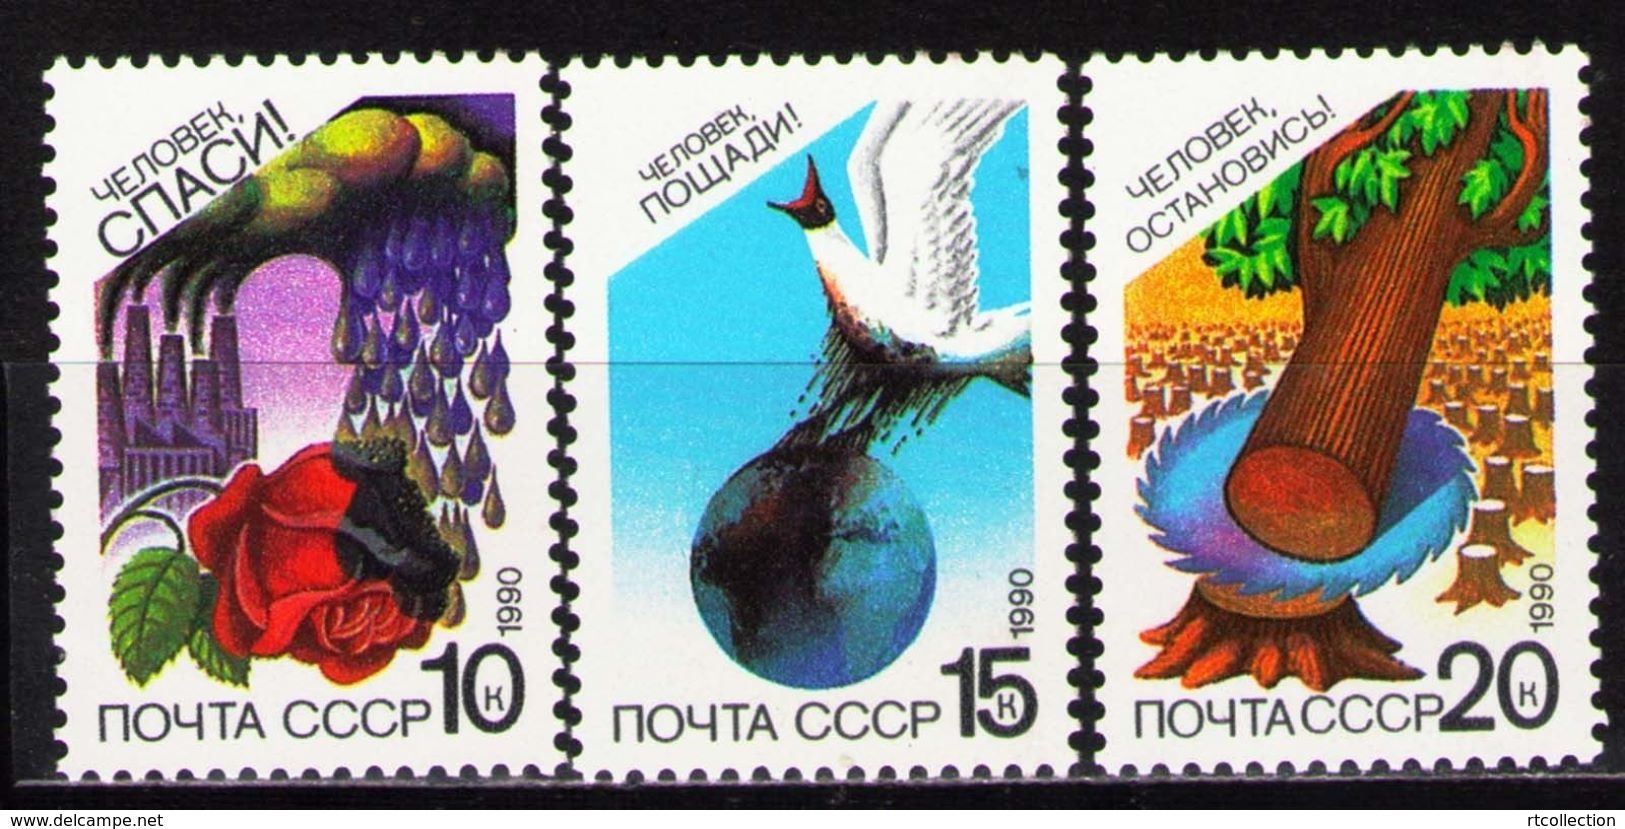 USSR Russia 1990 Nature Global Ecology Environment Protection Acid Rain Flowers Bird Tree Stamps Mi 6043-45 Sc 5851-53 - Environment & Climate Protection